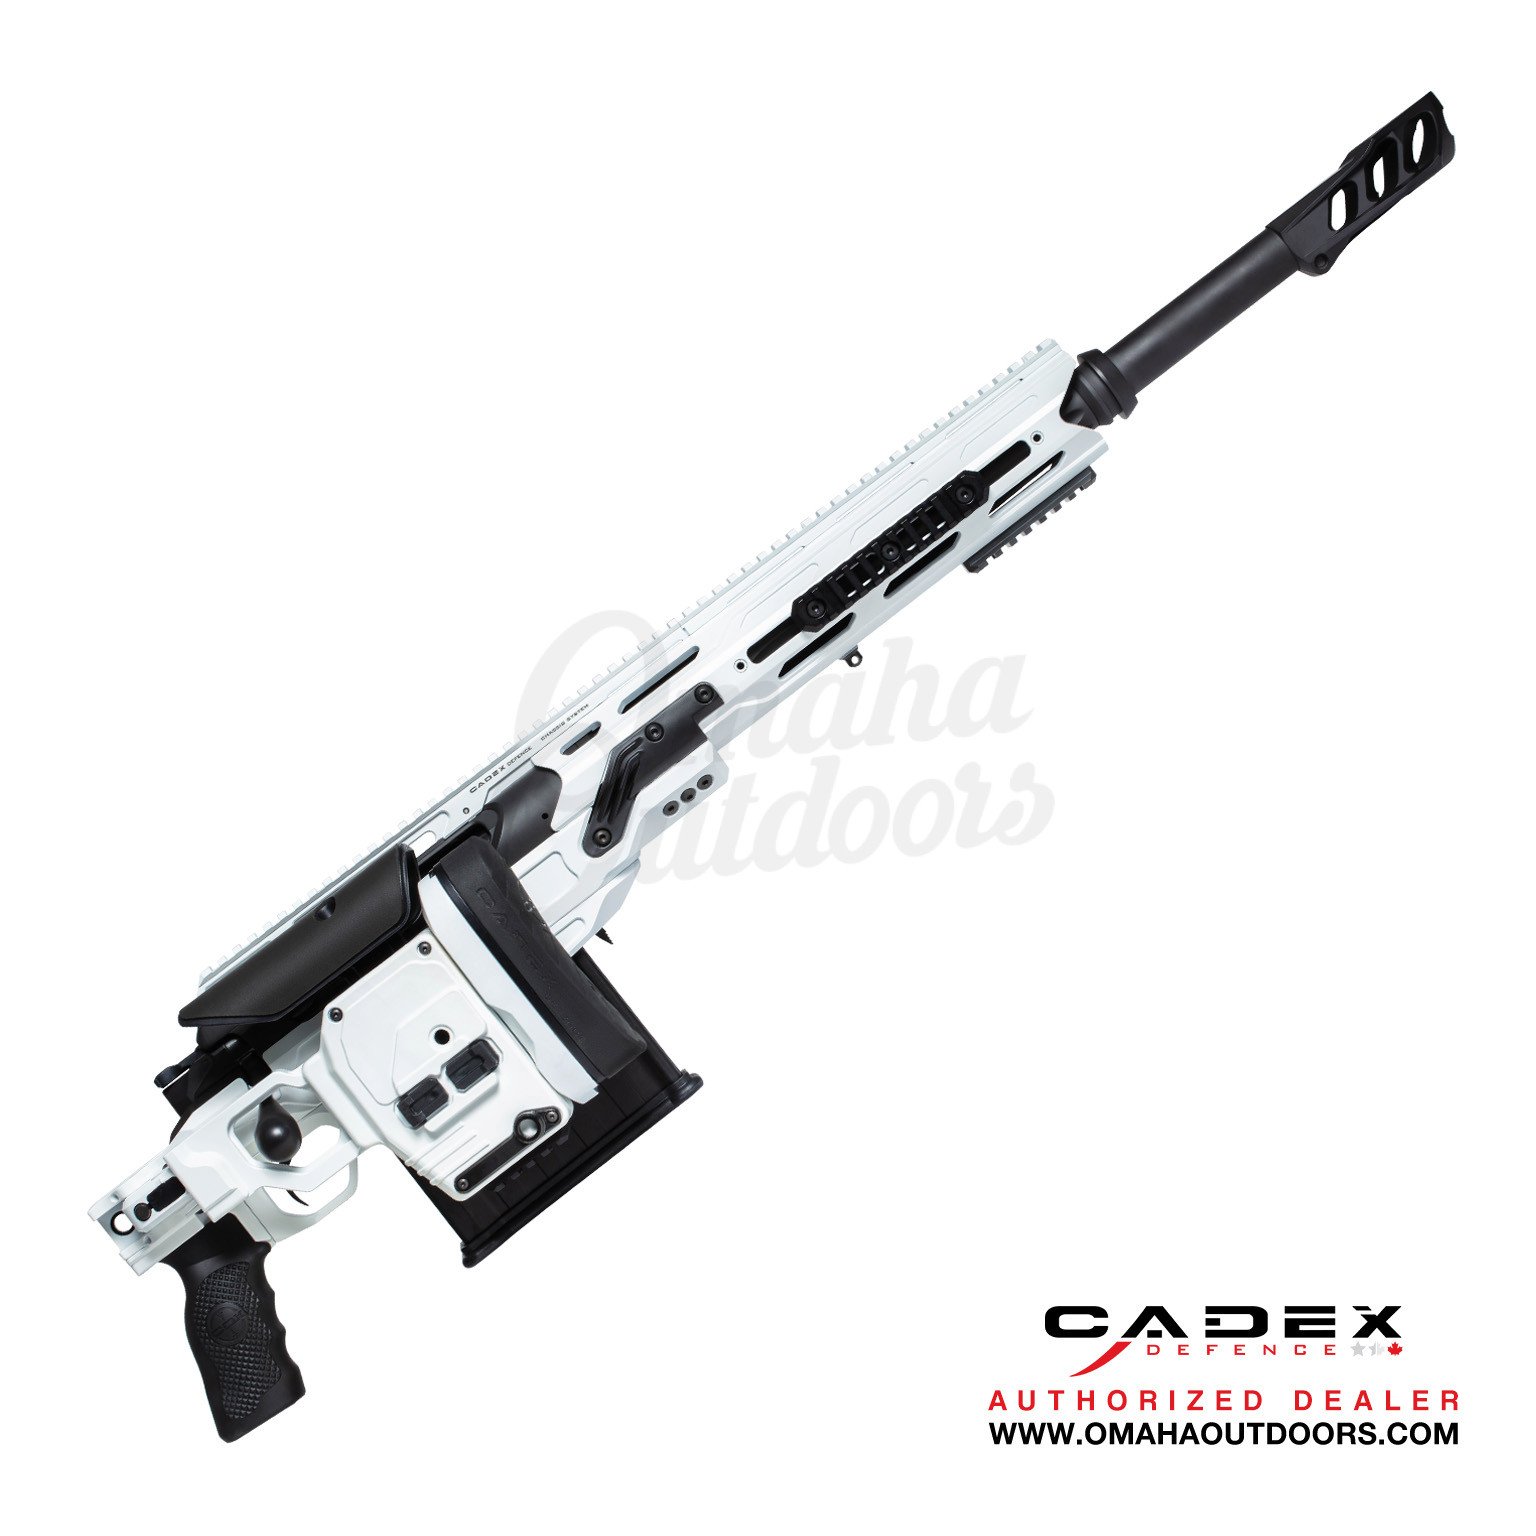 Cadex CDX-50 Tremor Series Rifle - Customized to your specs (CDX50-DUAL)